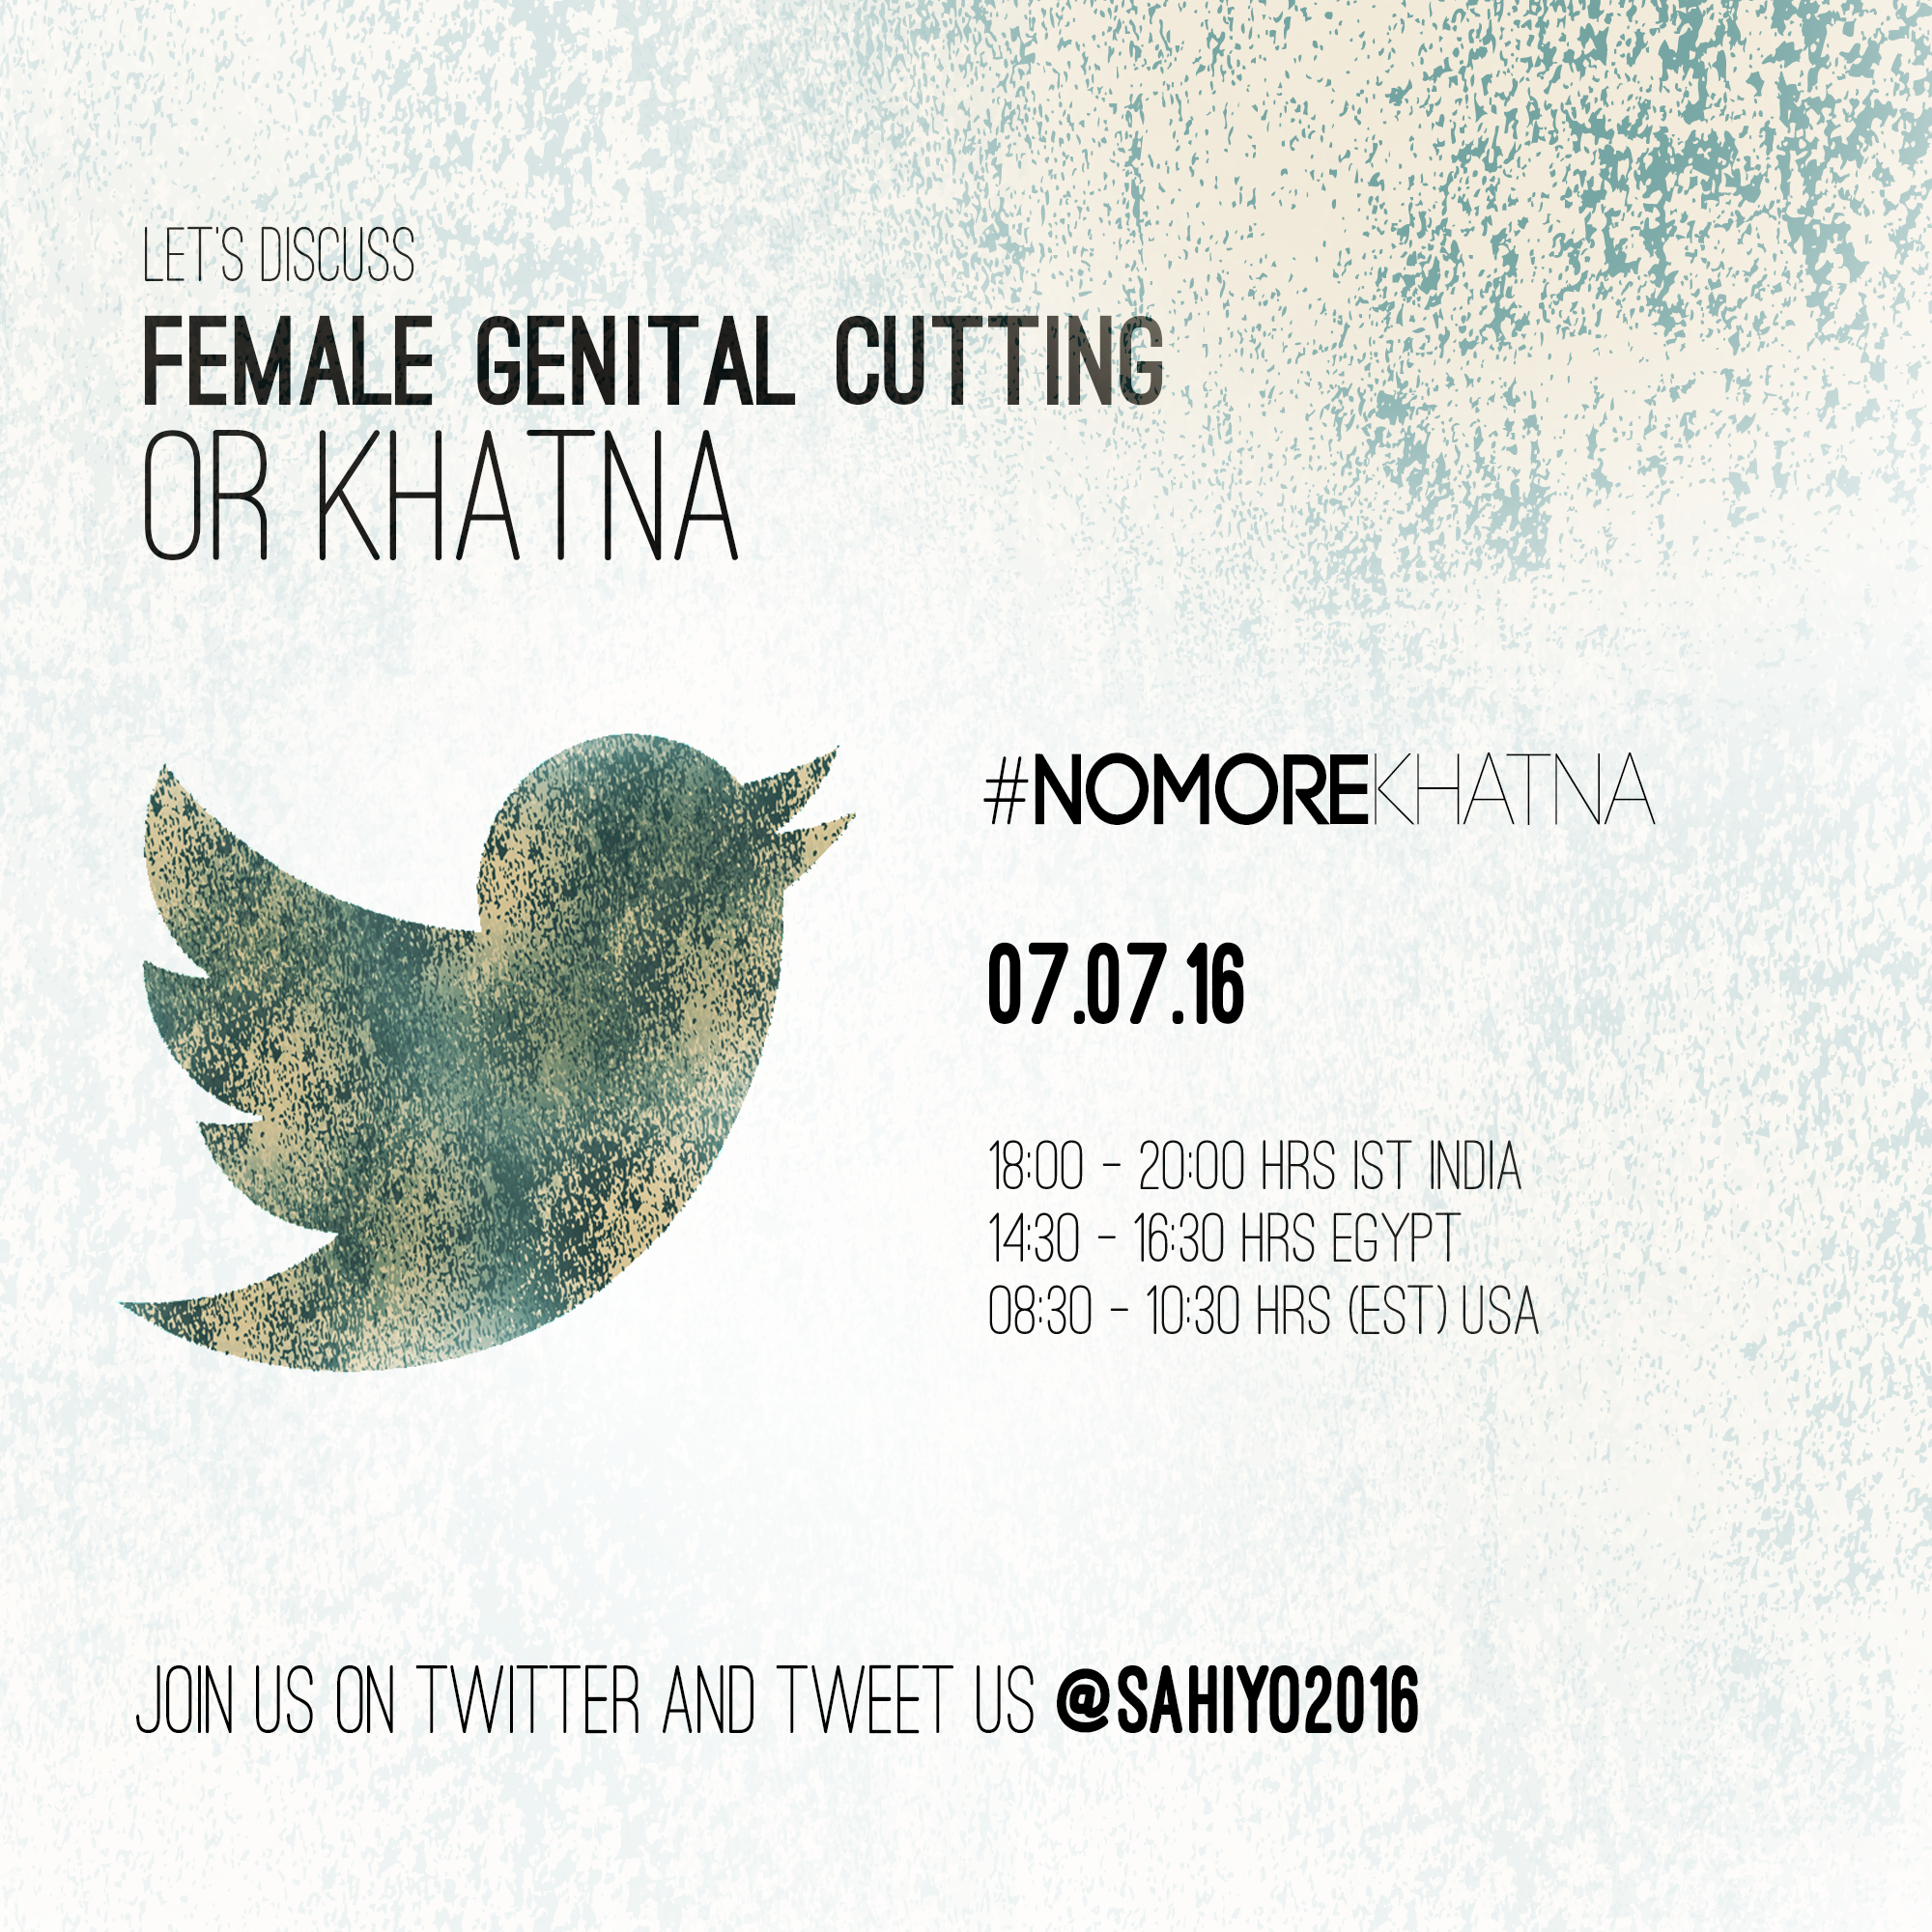 #NoMoreKhatna - Join Sahiyo on a Twitter Chat about FGC!